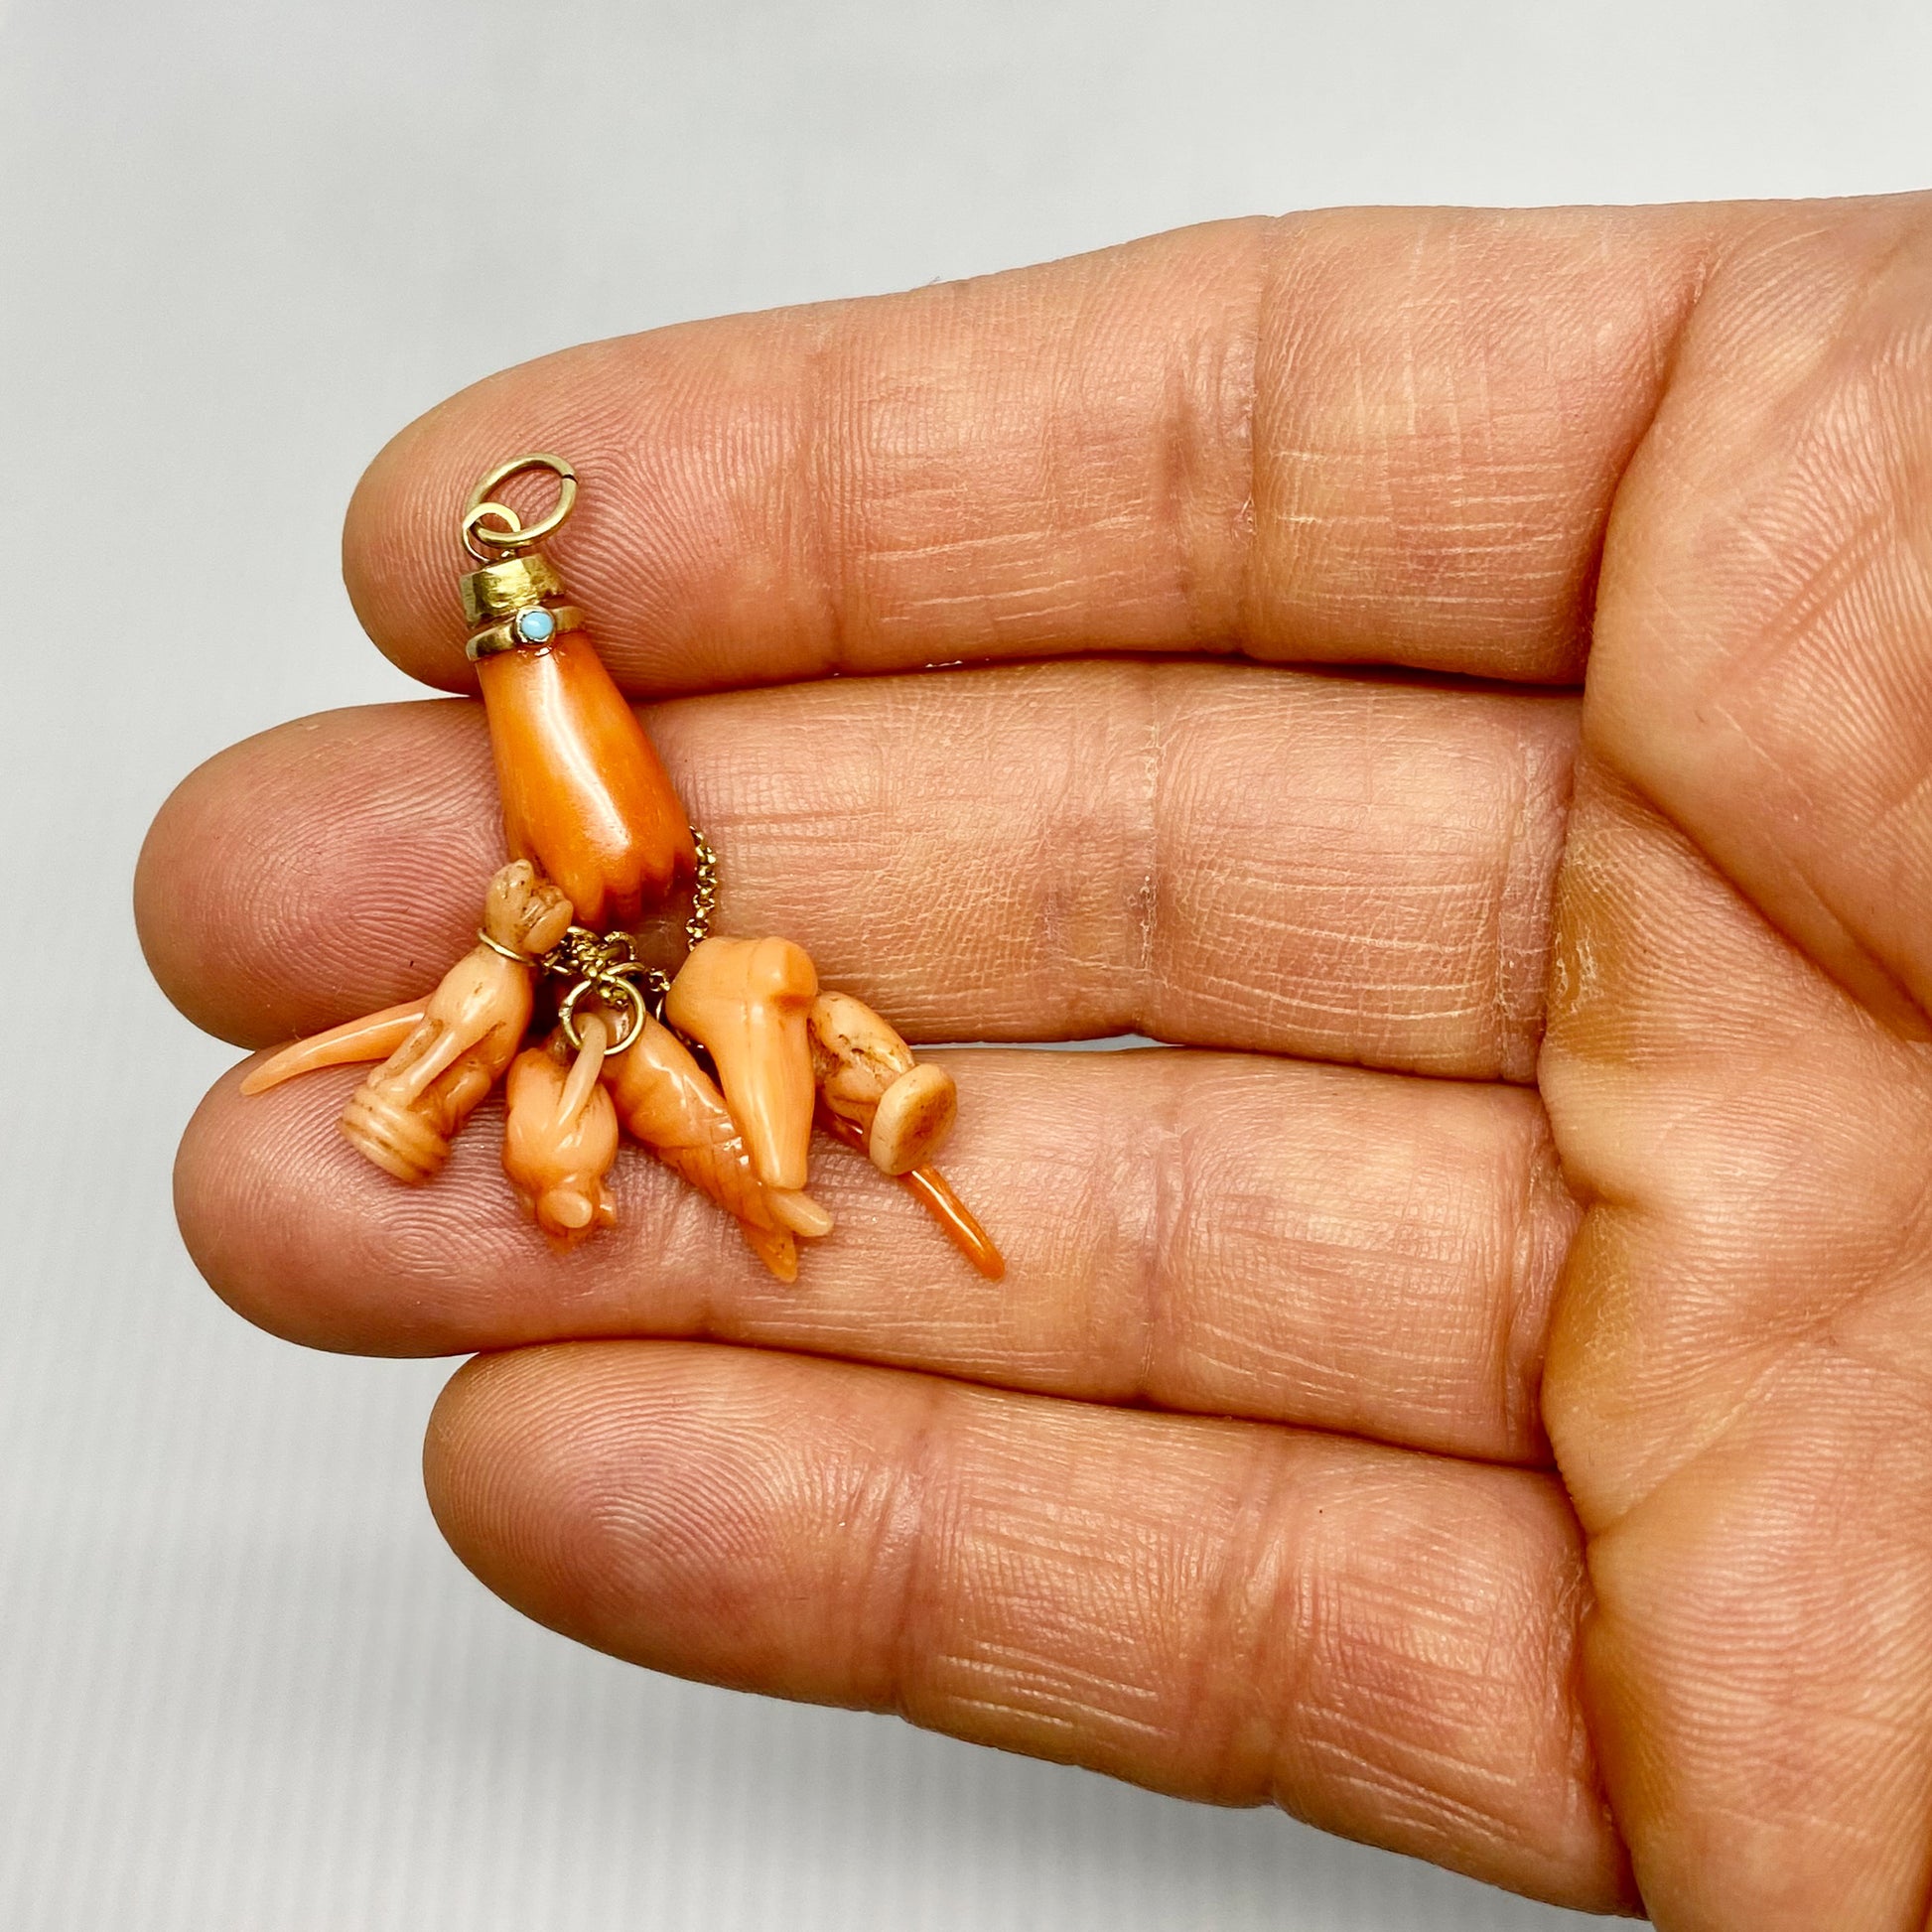 Antique Coral Hand Charm Holder Pendant of 14k Gold - Trademark